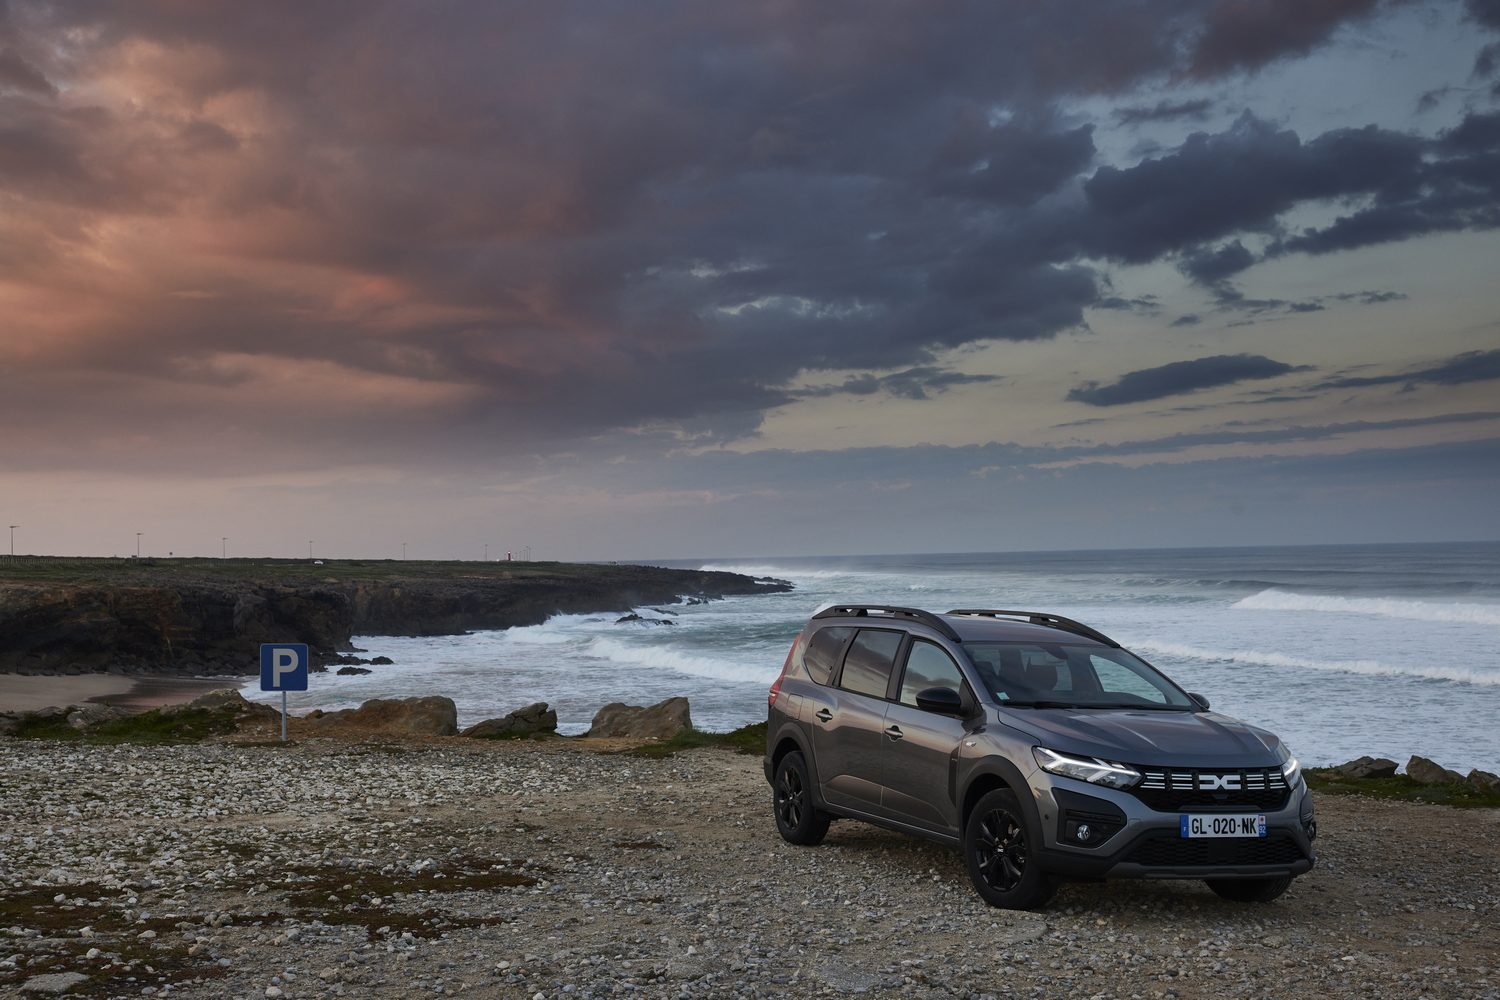 Dacia Jogger Gets Four-Cylinder Hybrid Engine With 140 HP